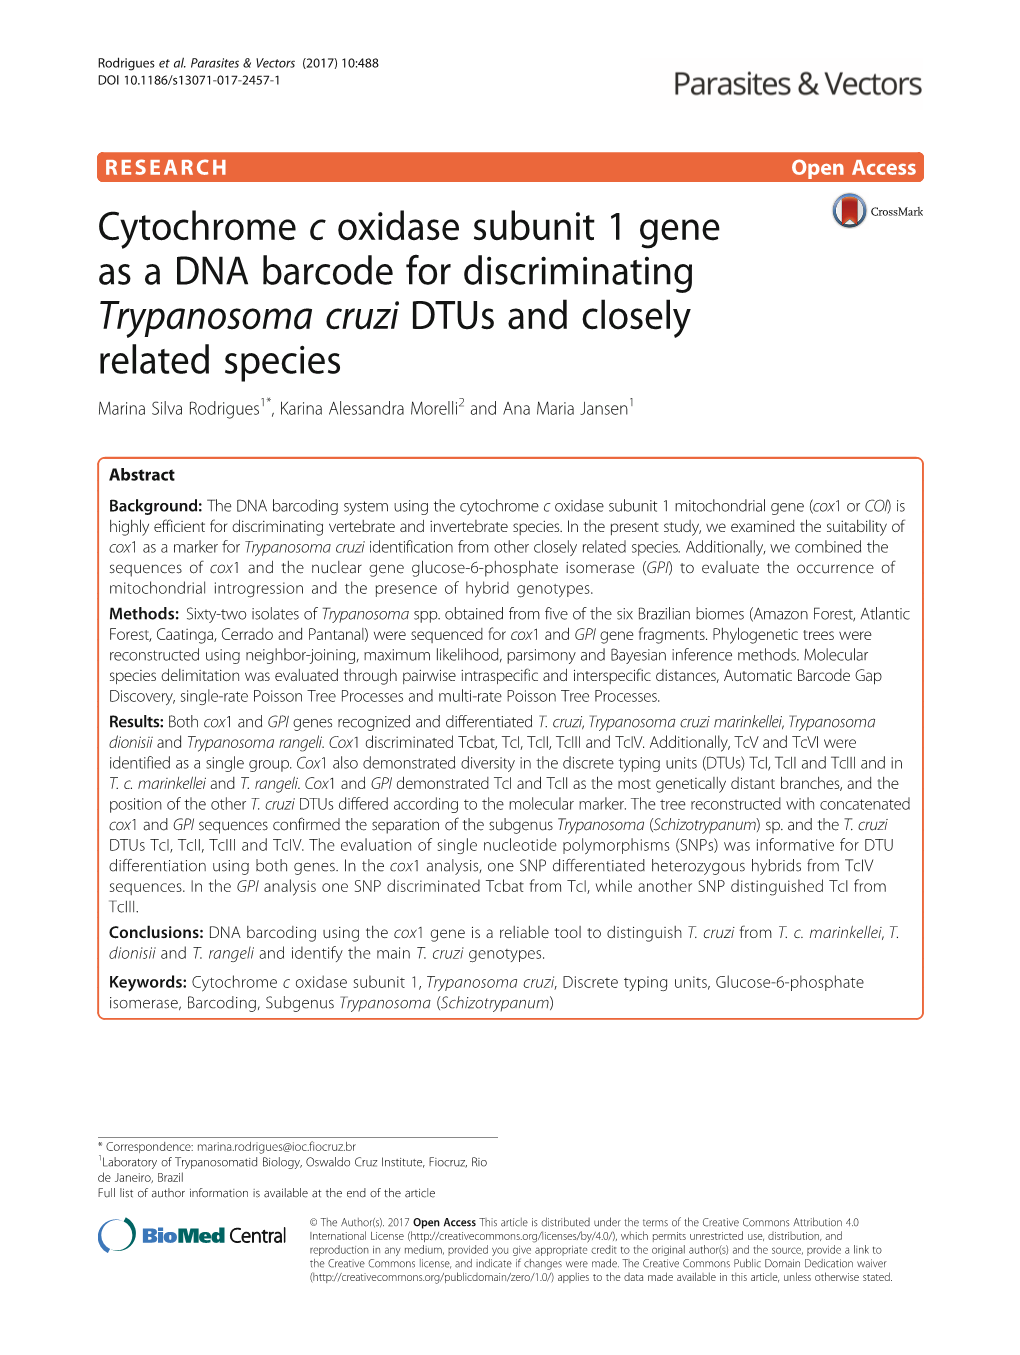 Cytochrome C Oxidase Subunit 1 Gene As a DNA Barcode for Discriminating Trypanosoma Cruzi Dtus and Closely Related Species